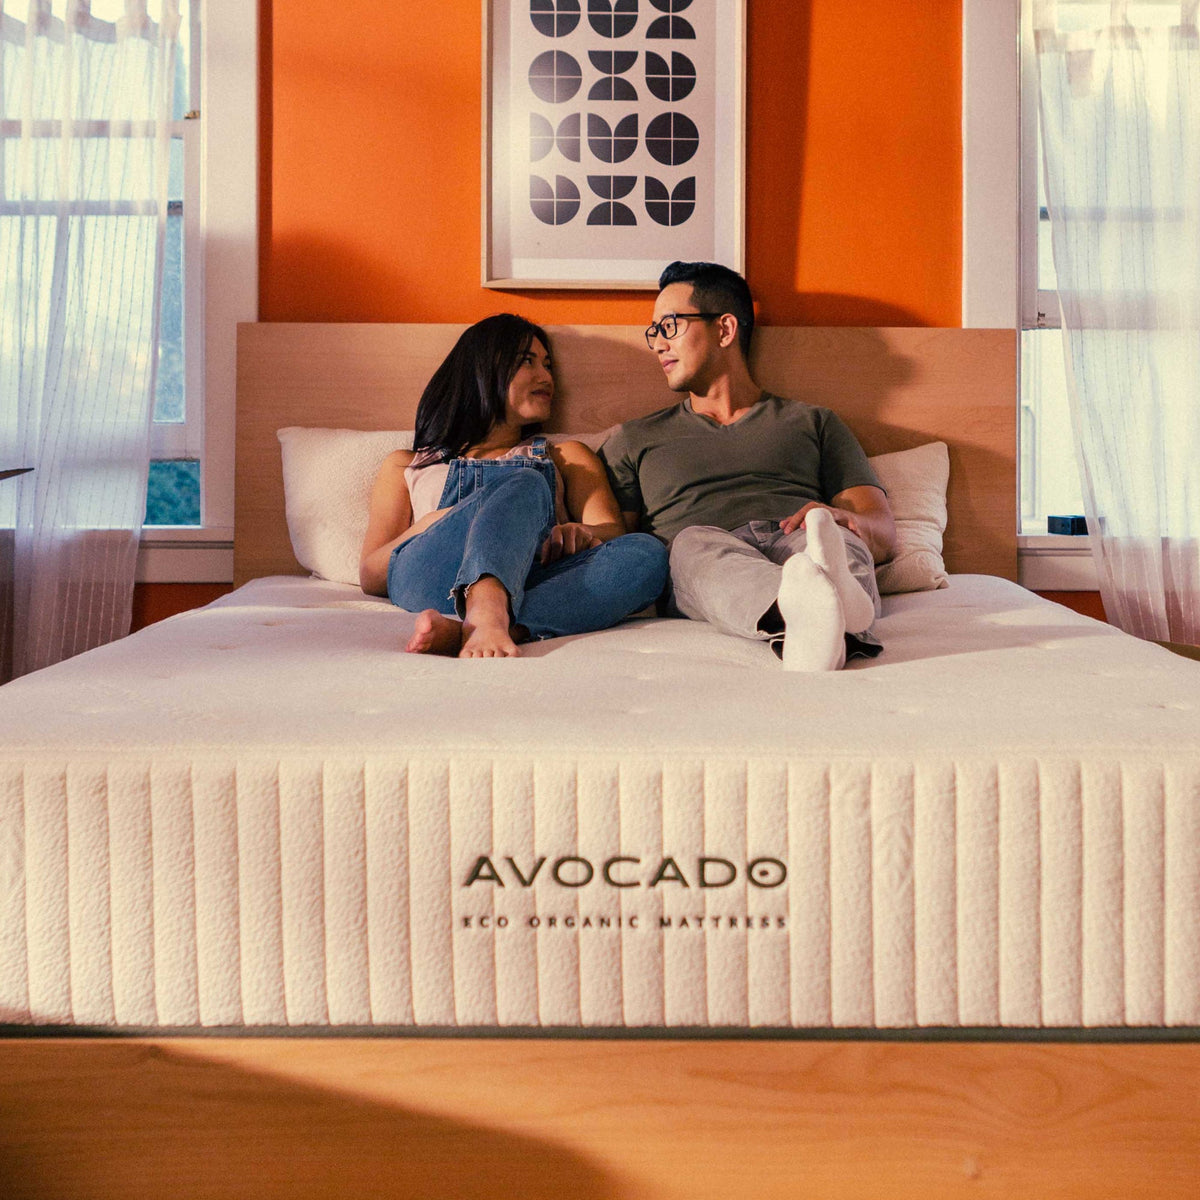 Affordable Mattress - Best organic mattress - We craft our hybrid Eco Organic Mattress in Los Angeles with up to 975 8” pocketed coils and 100% GOLS certified organic latex from our own sustainable farms in India and Guatemala for a contouring, gentle-firm feel.